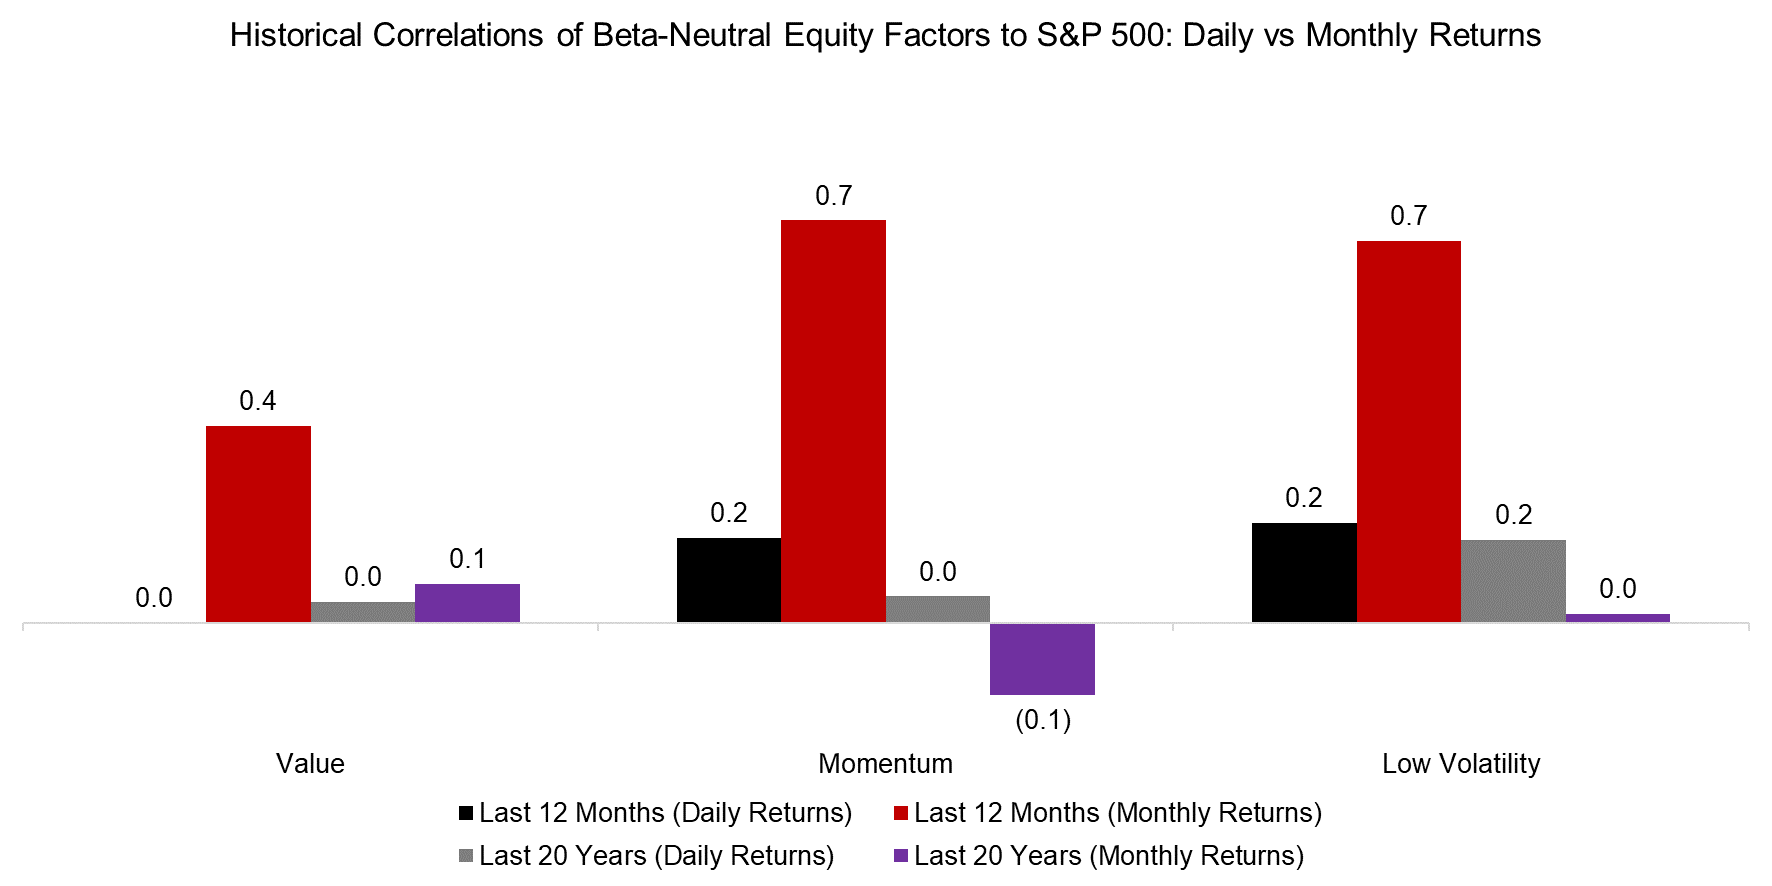 Historical Correlations of Beta-Neutral Equity Factors to S&P 500 Daily vs Monthly Returns